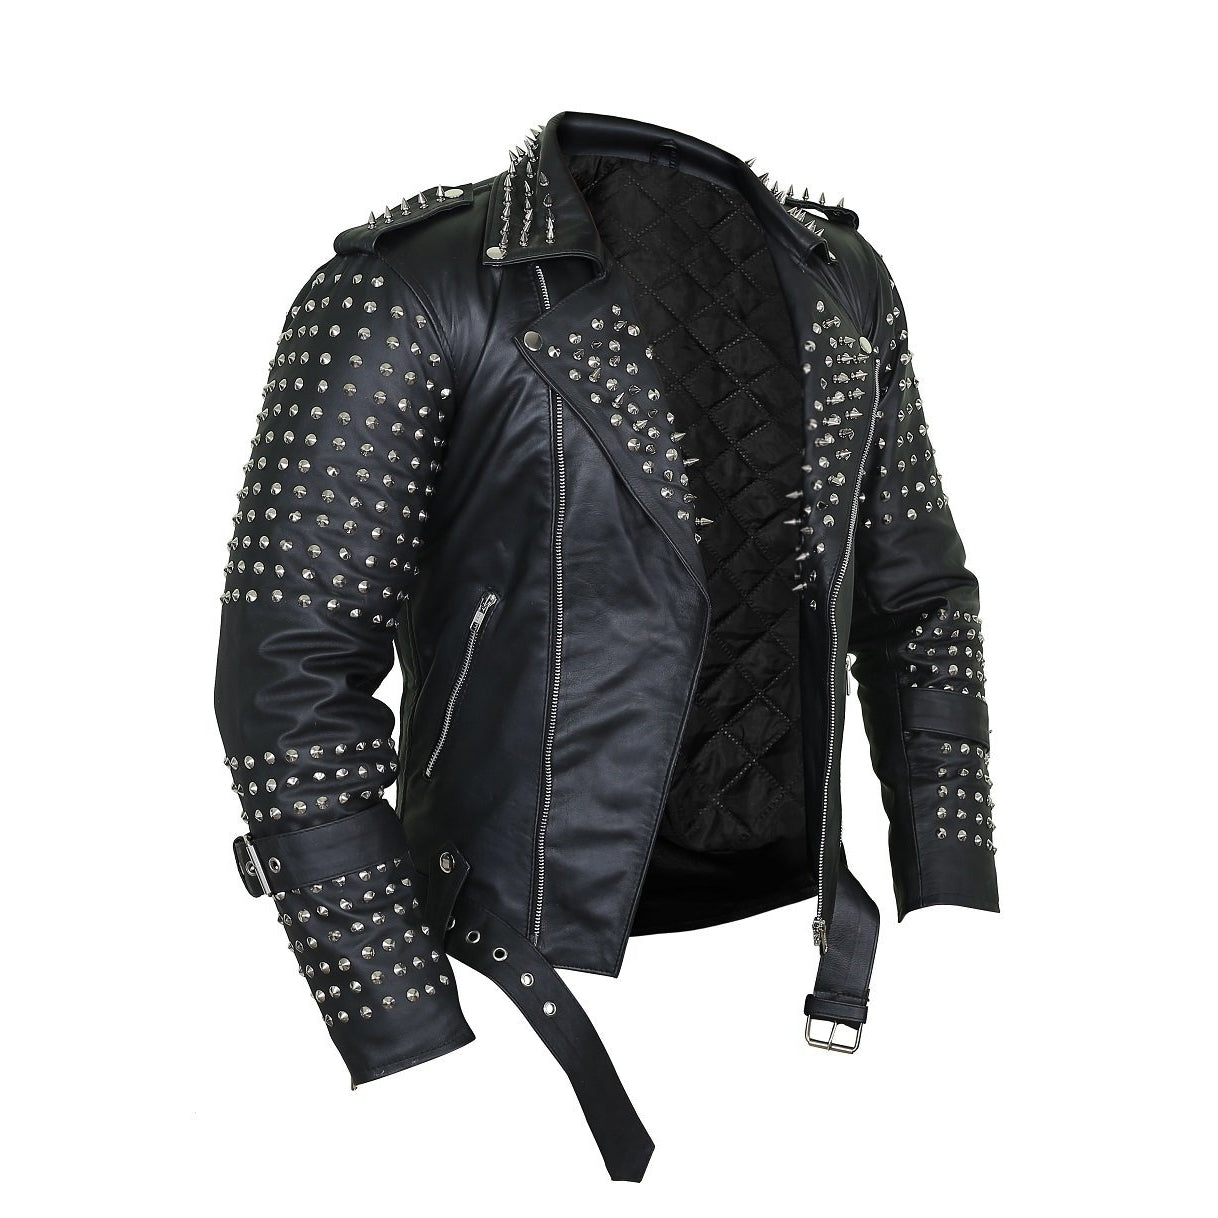 Black Punk Leather Jacket with Spikes Decor